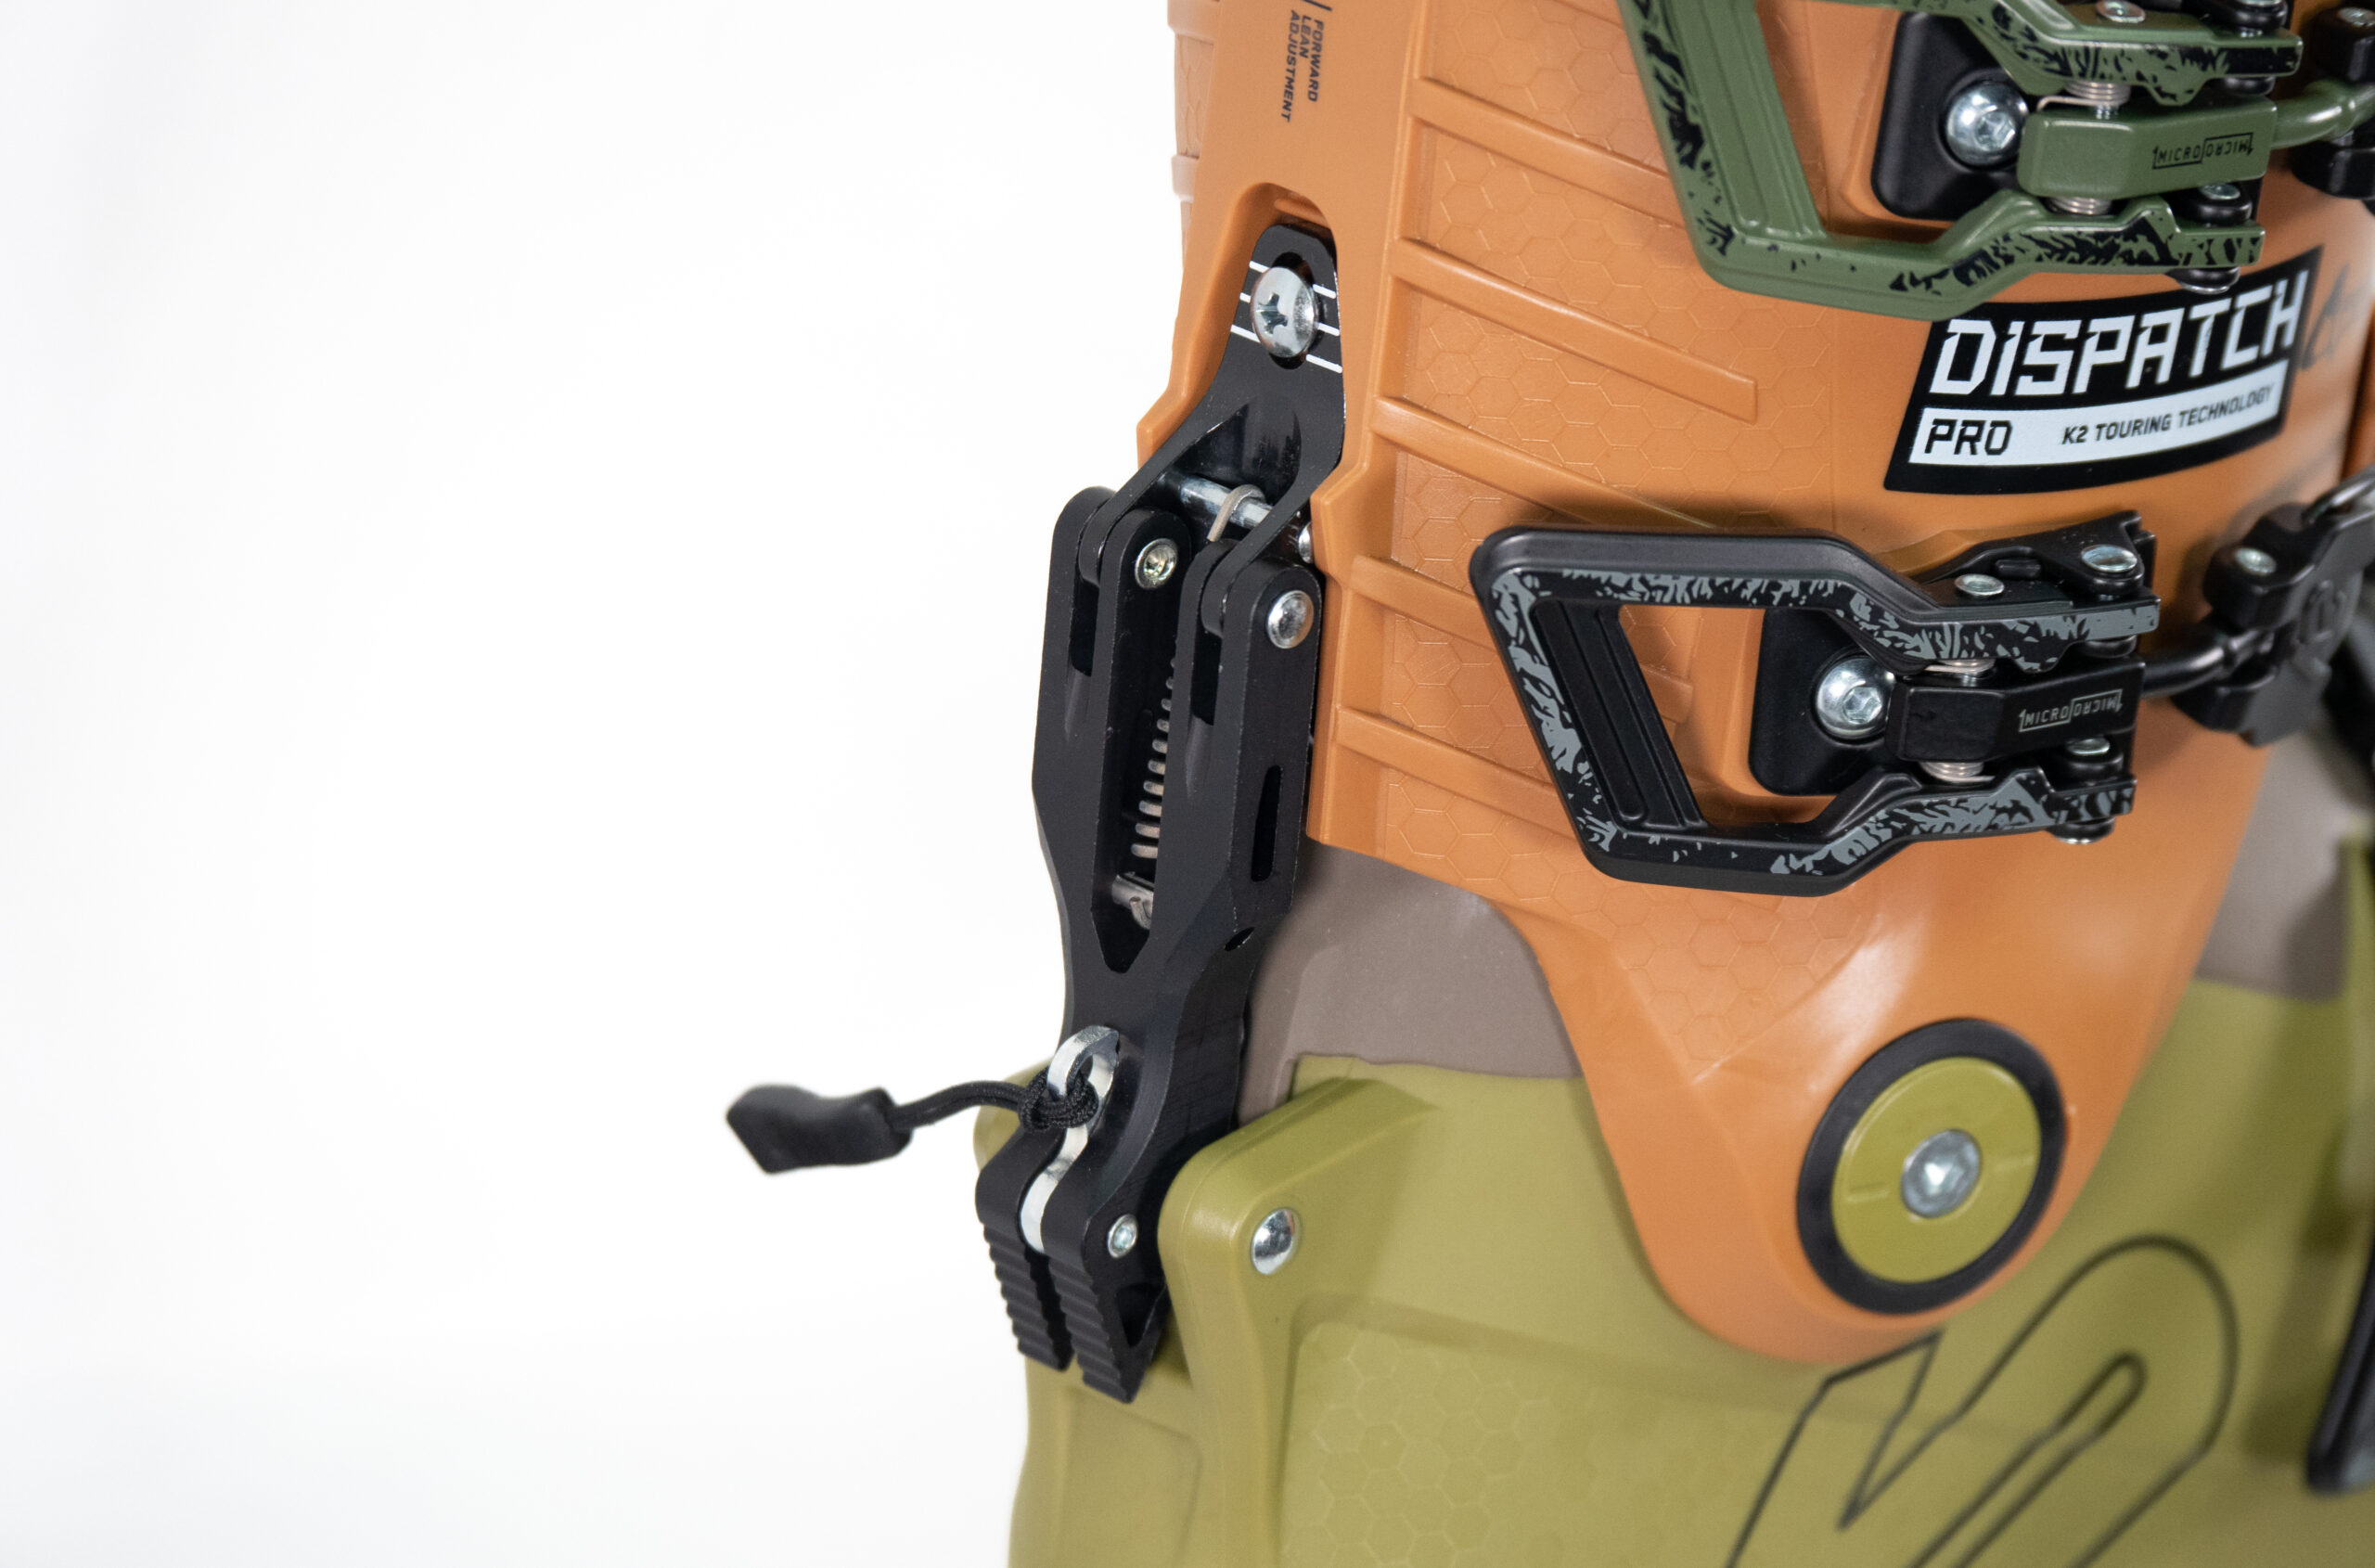 Paul Forward reviews the K2 Dispatch Pro for BLISTER.